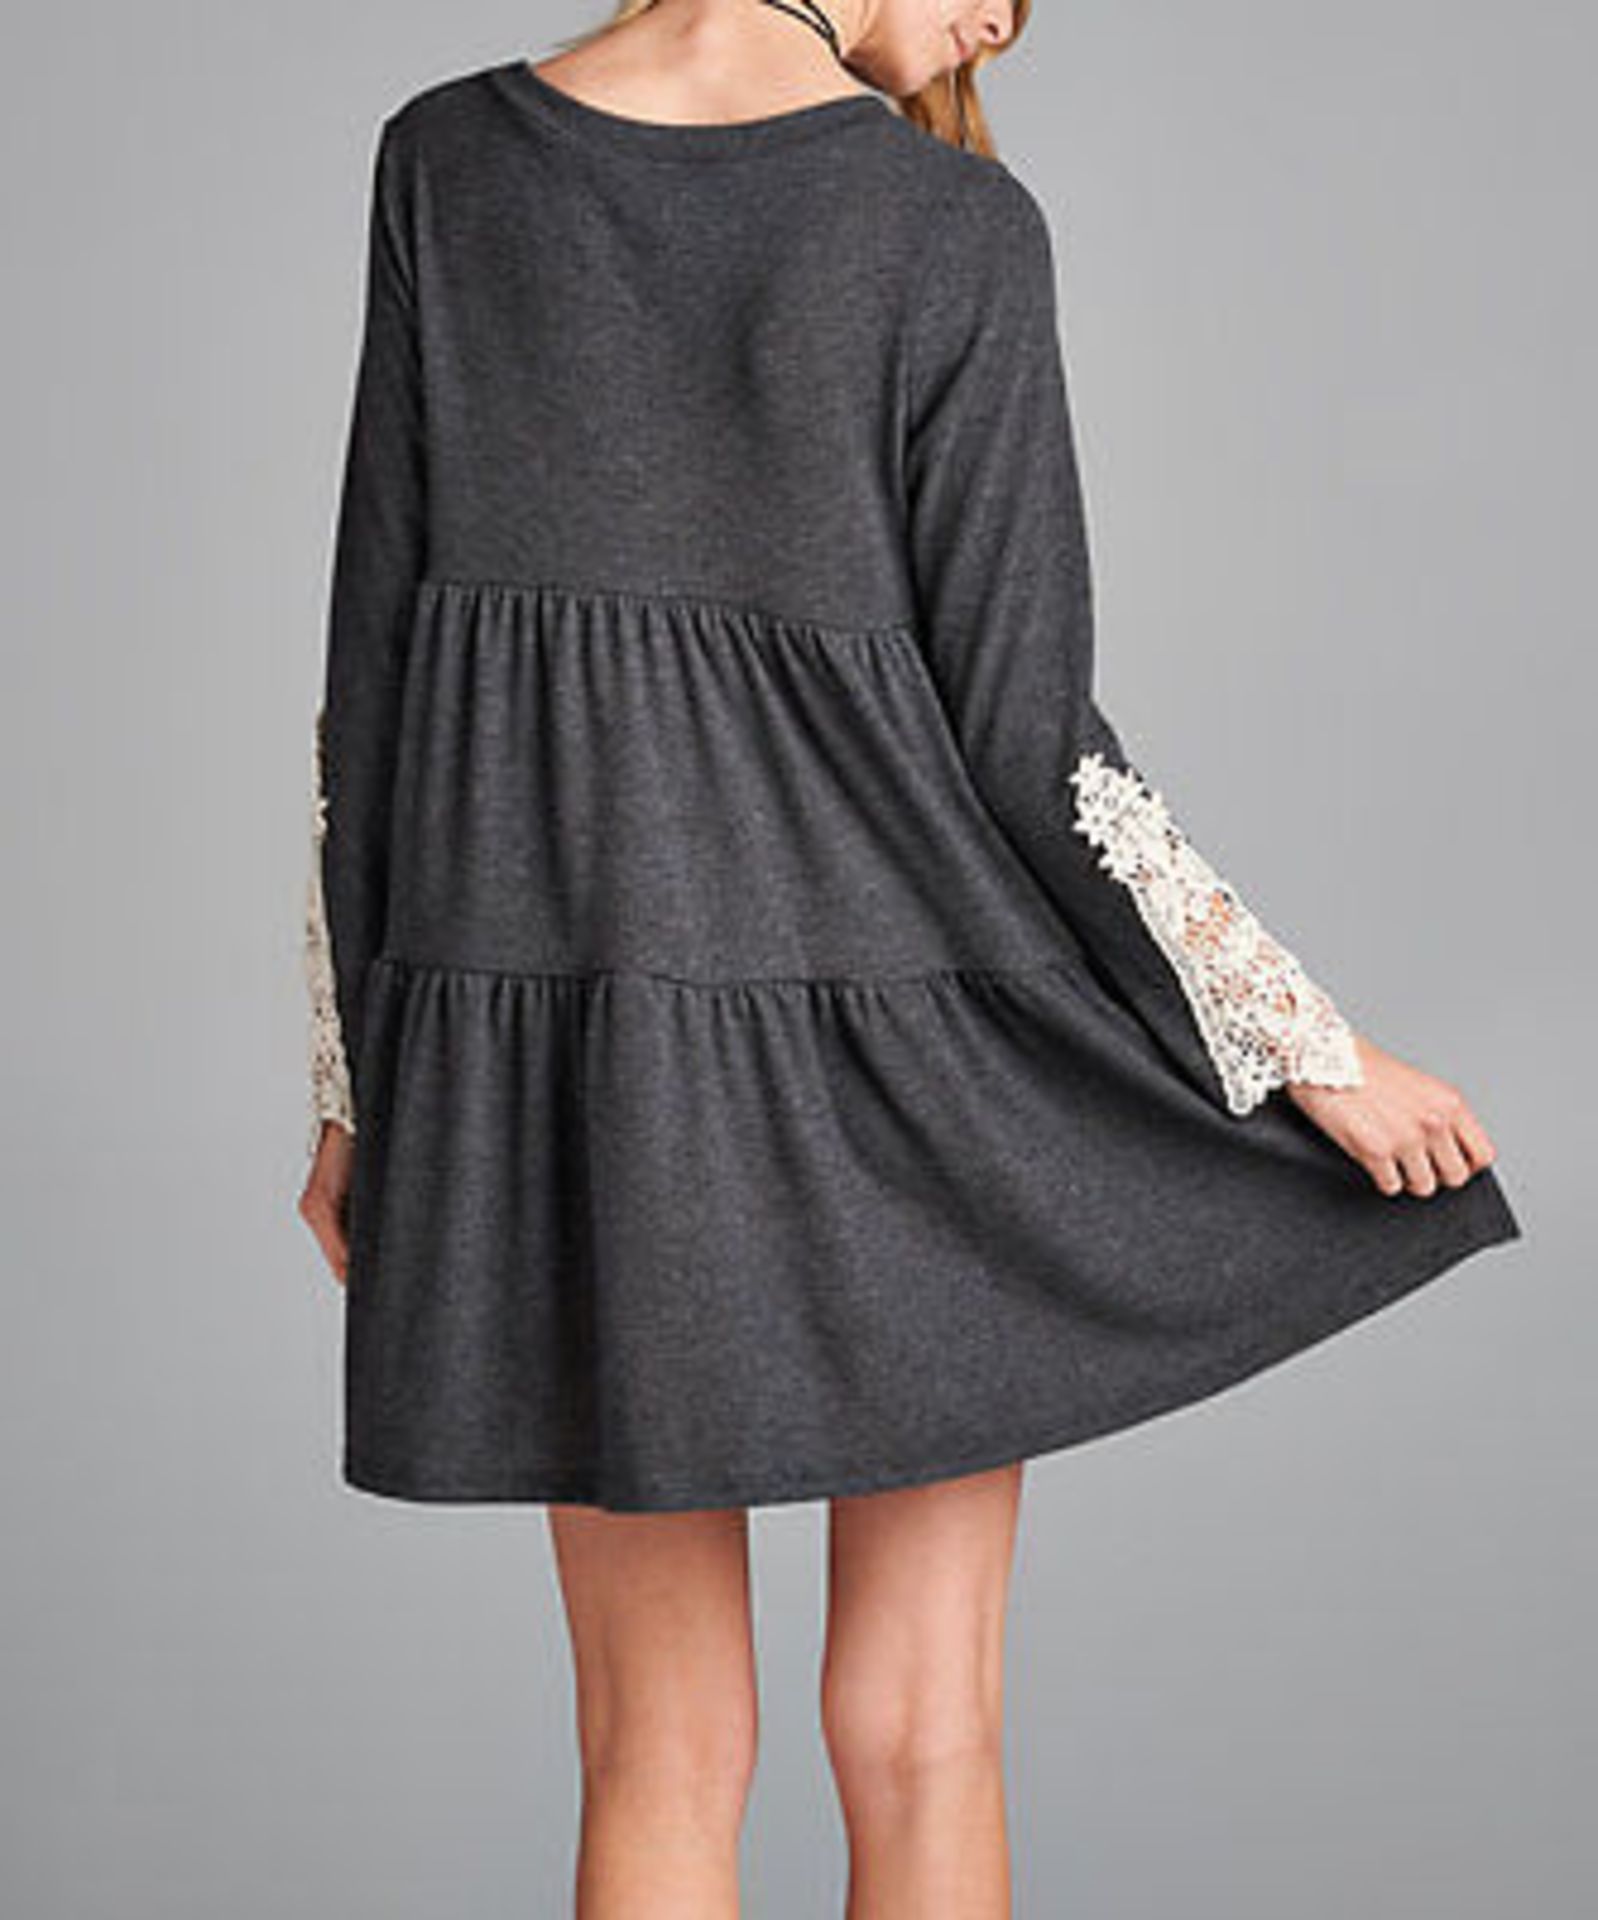 Charcoal Crochet-Sleeve Swing Dress (US S/UK 8/EU 36) (New with tags) [Ref: 44823101- T-4] - Image 3 of 3